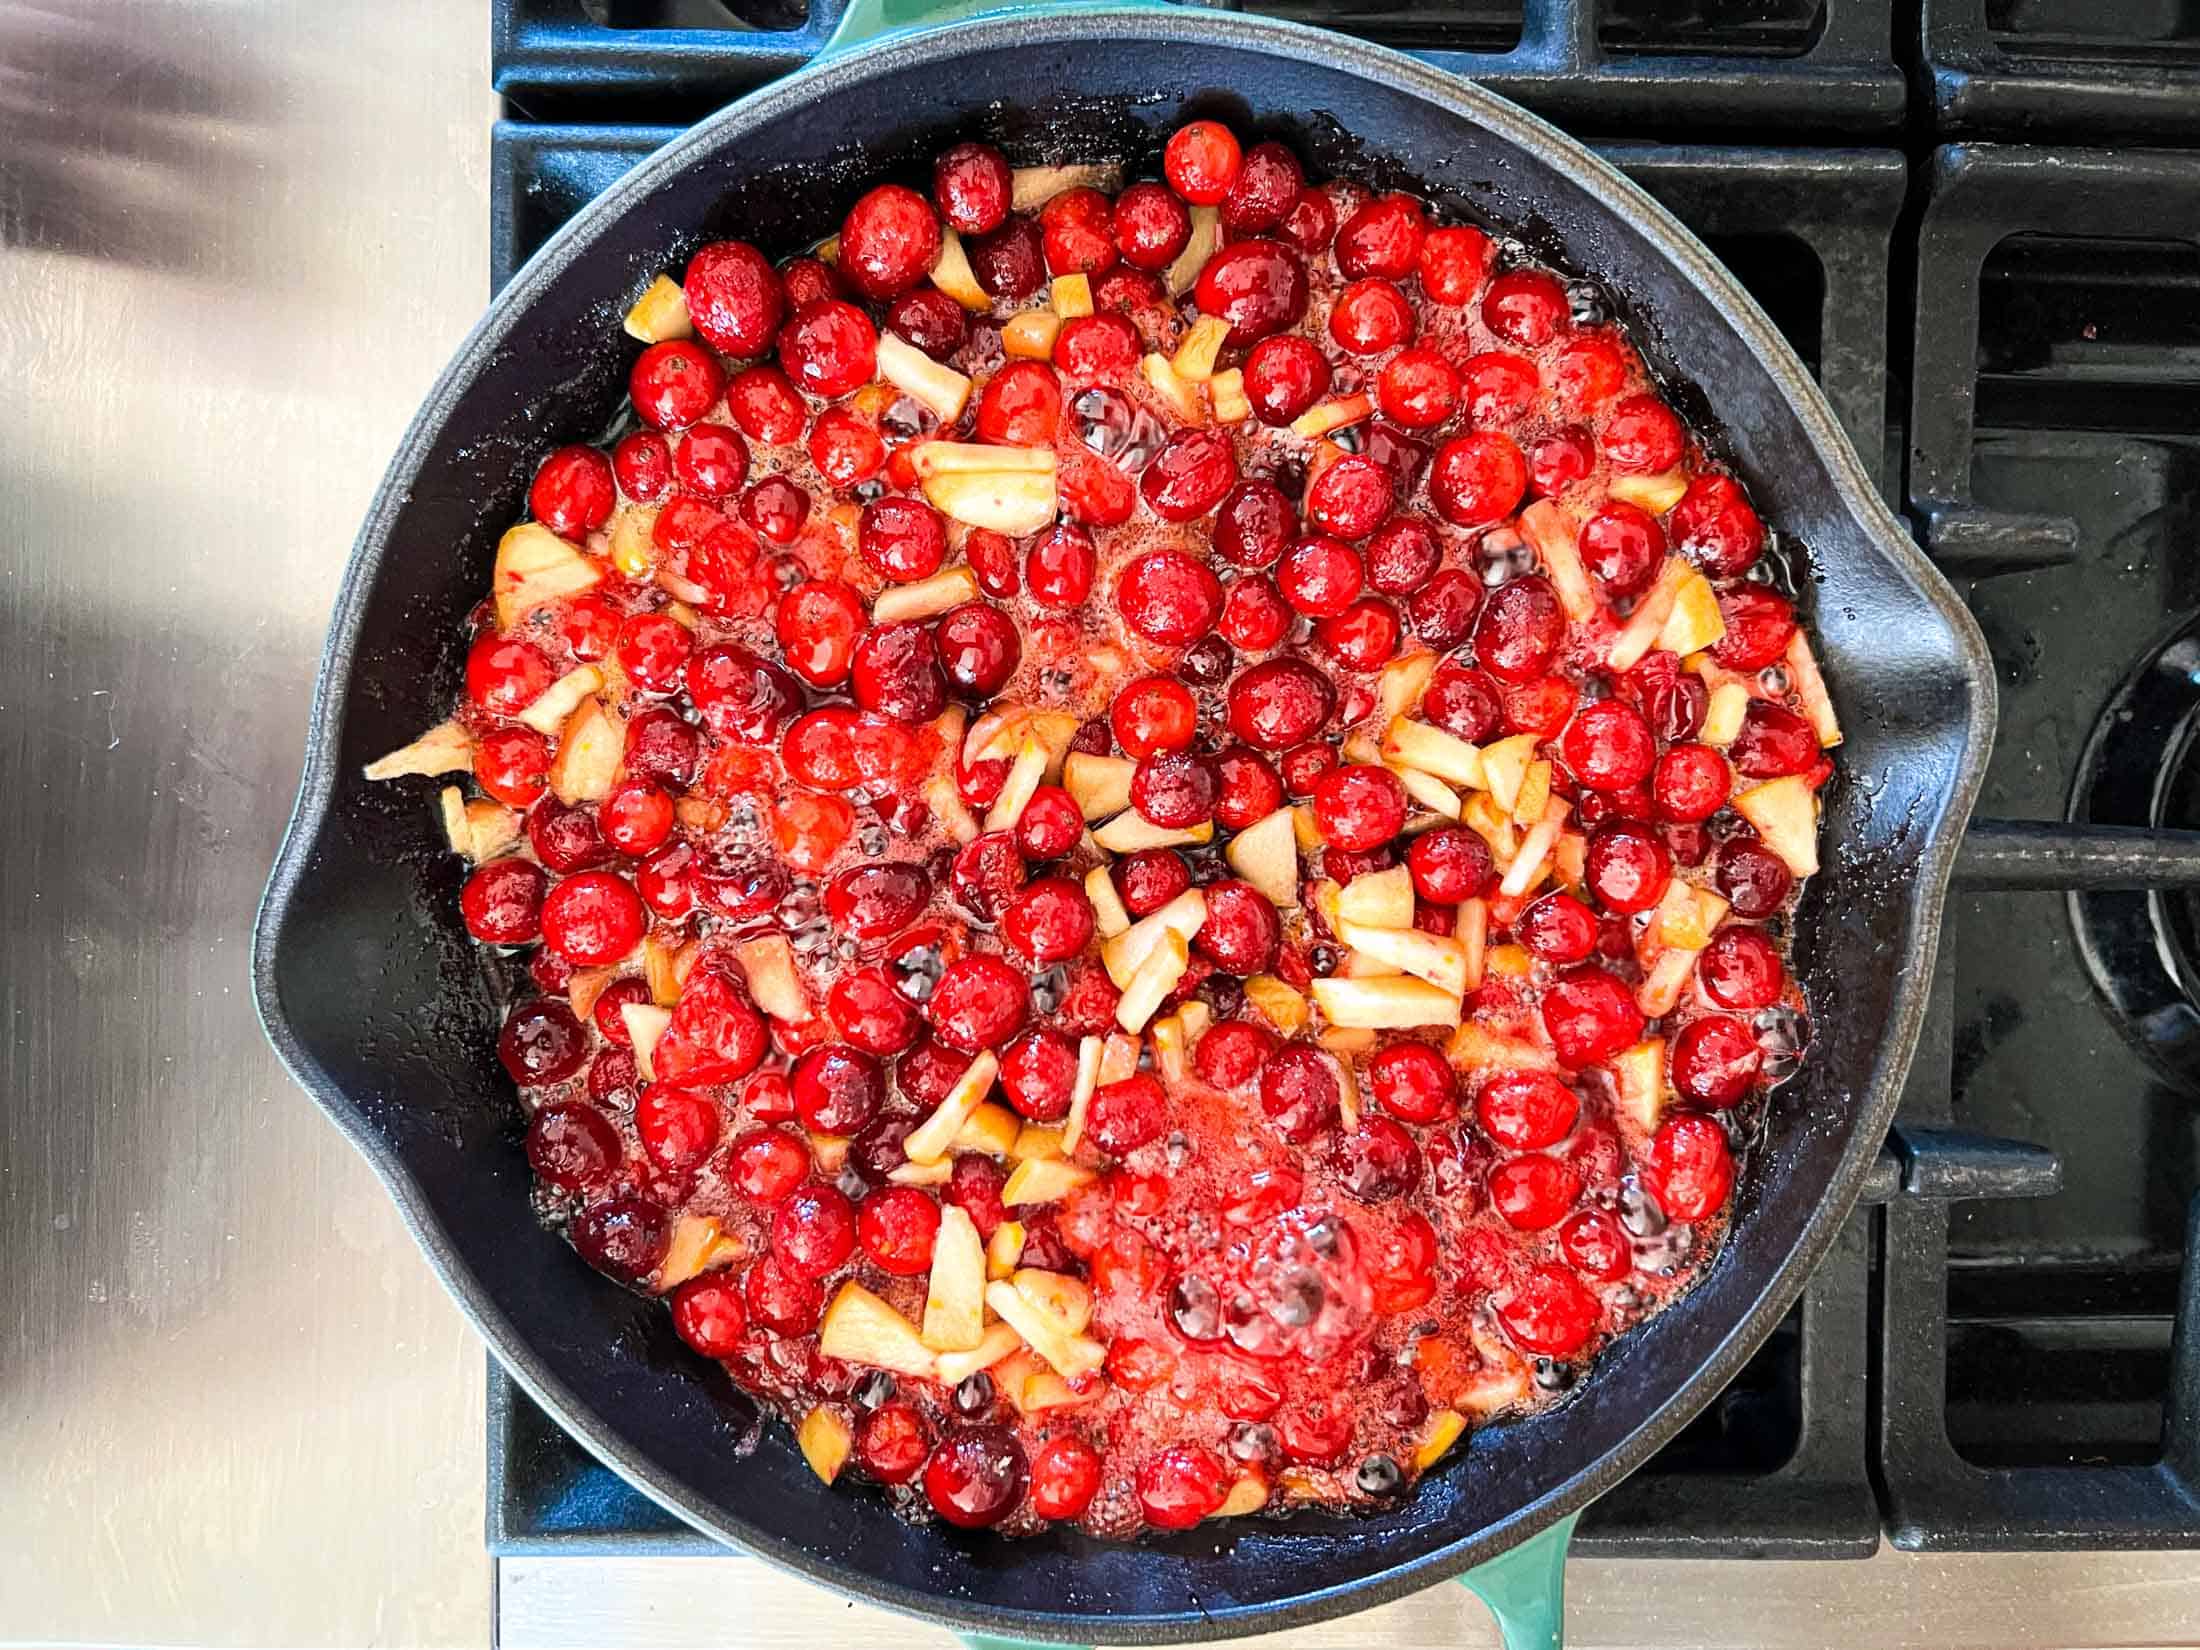 Cranberries, apples, and other ingredients boiling in a cast iron pan.